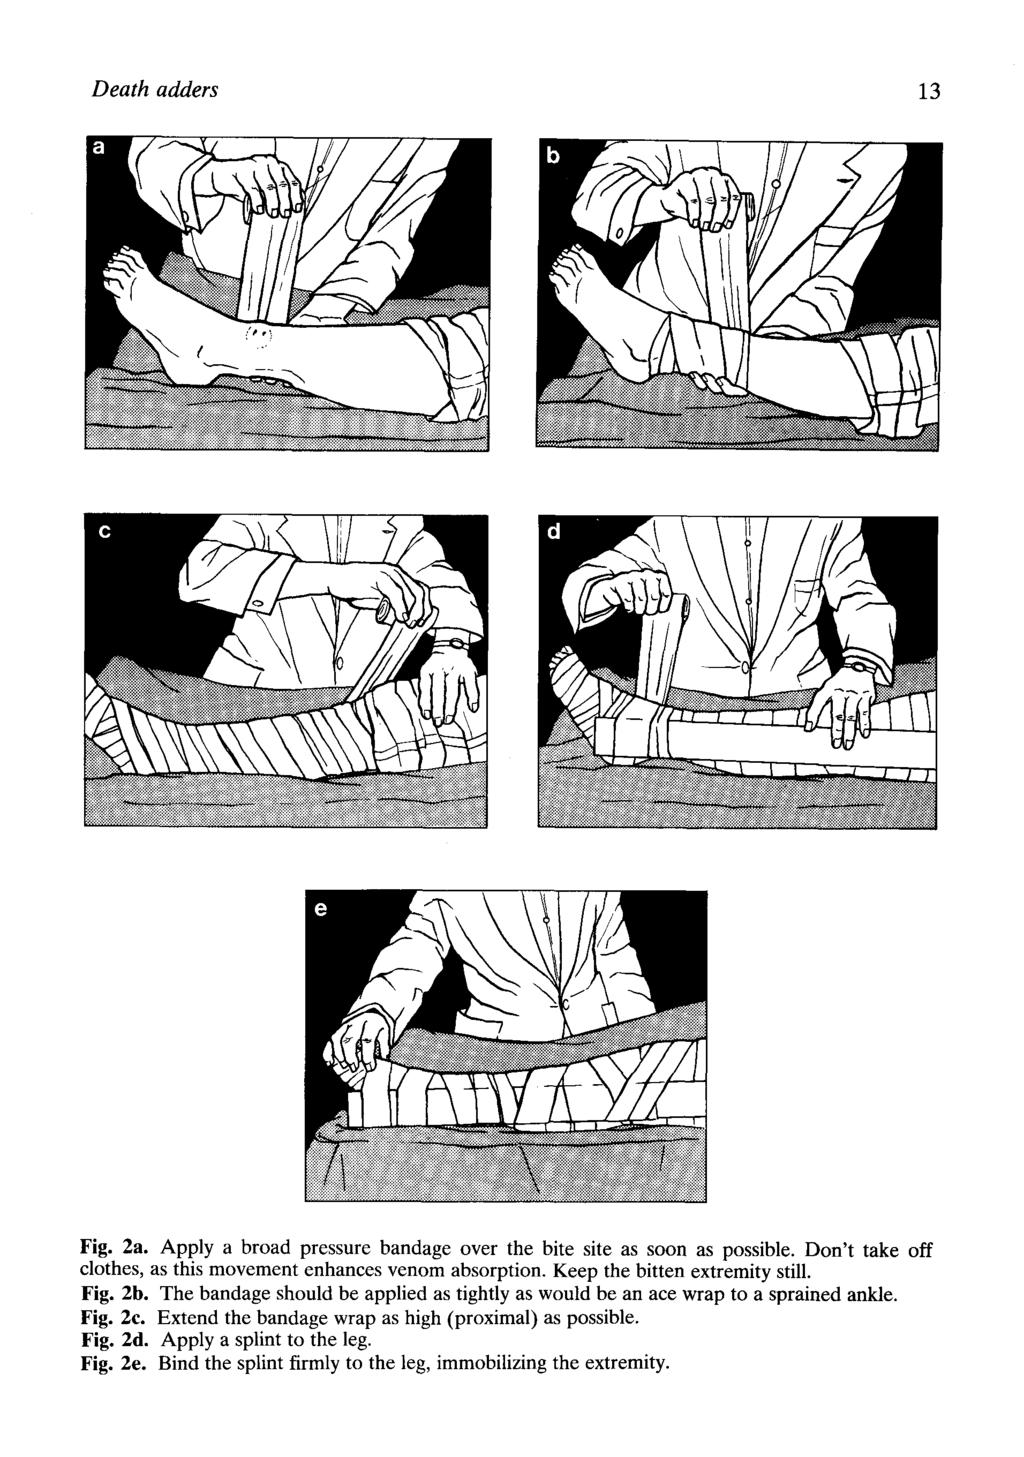 Death adders 13 Fig. 2a. Apply a broad pressure bandage over the bite site as soon as possible. Don't take off clothes, as this movement enhances venom absorption. Keep the bitten extremity still.